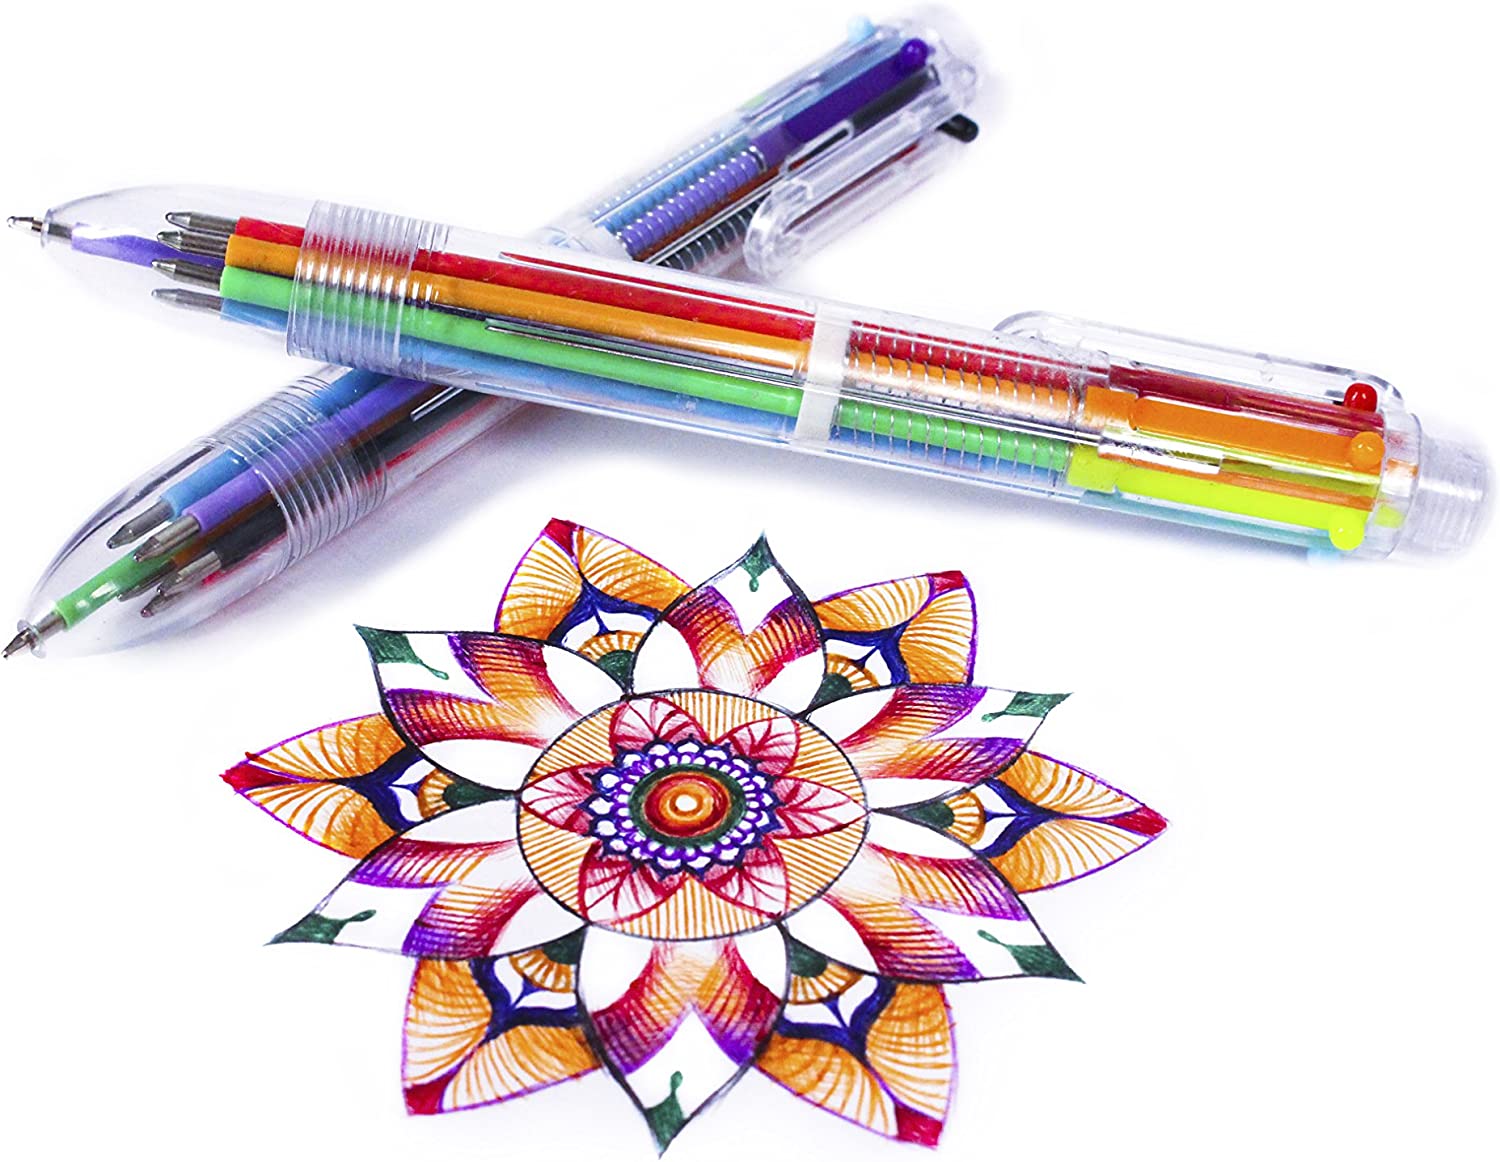 Hieno Supplies Multicolor Pens - 24 Pack of 6-in-1 Ballpoint Pens - 6 Vivid  Colors in Every Pen